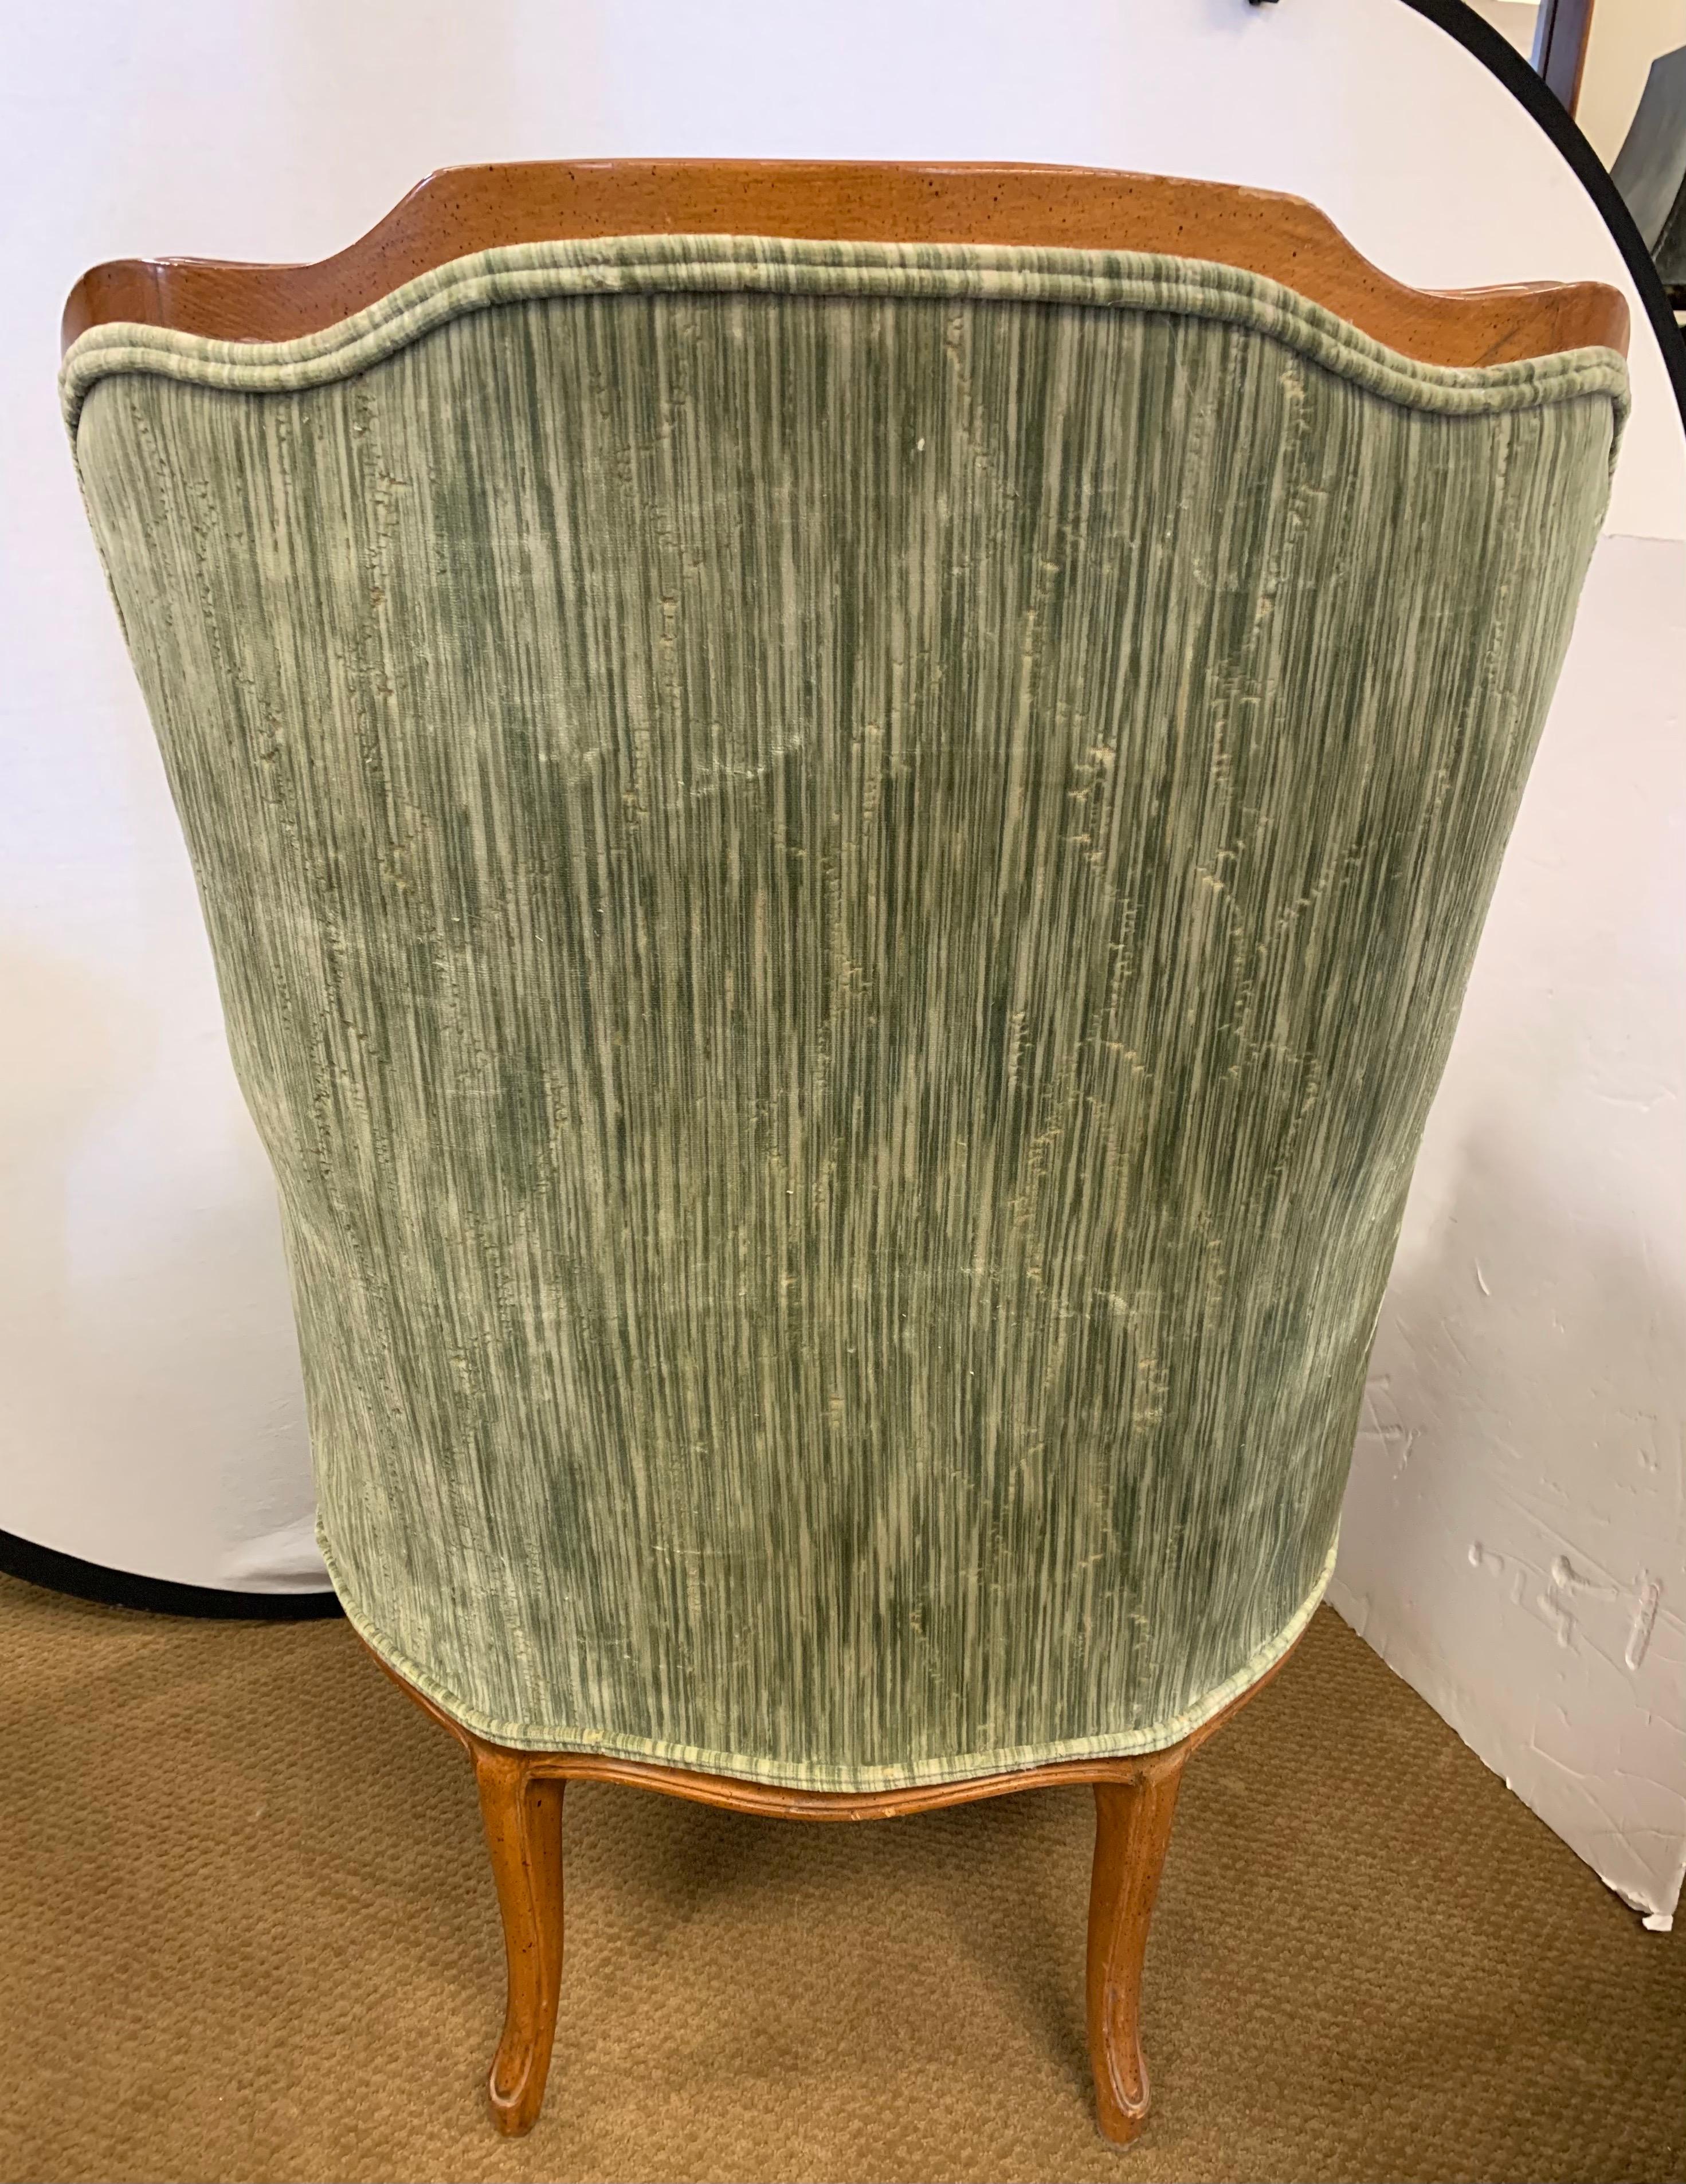 Mid-20th Century French Bergère Chair Newly Upholstered in Crushed Velvet Clarence House Textile